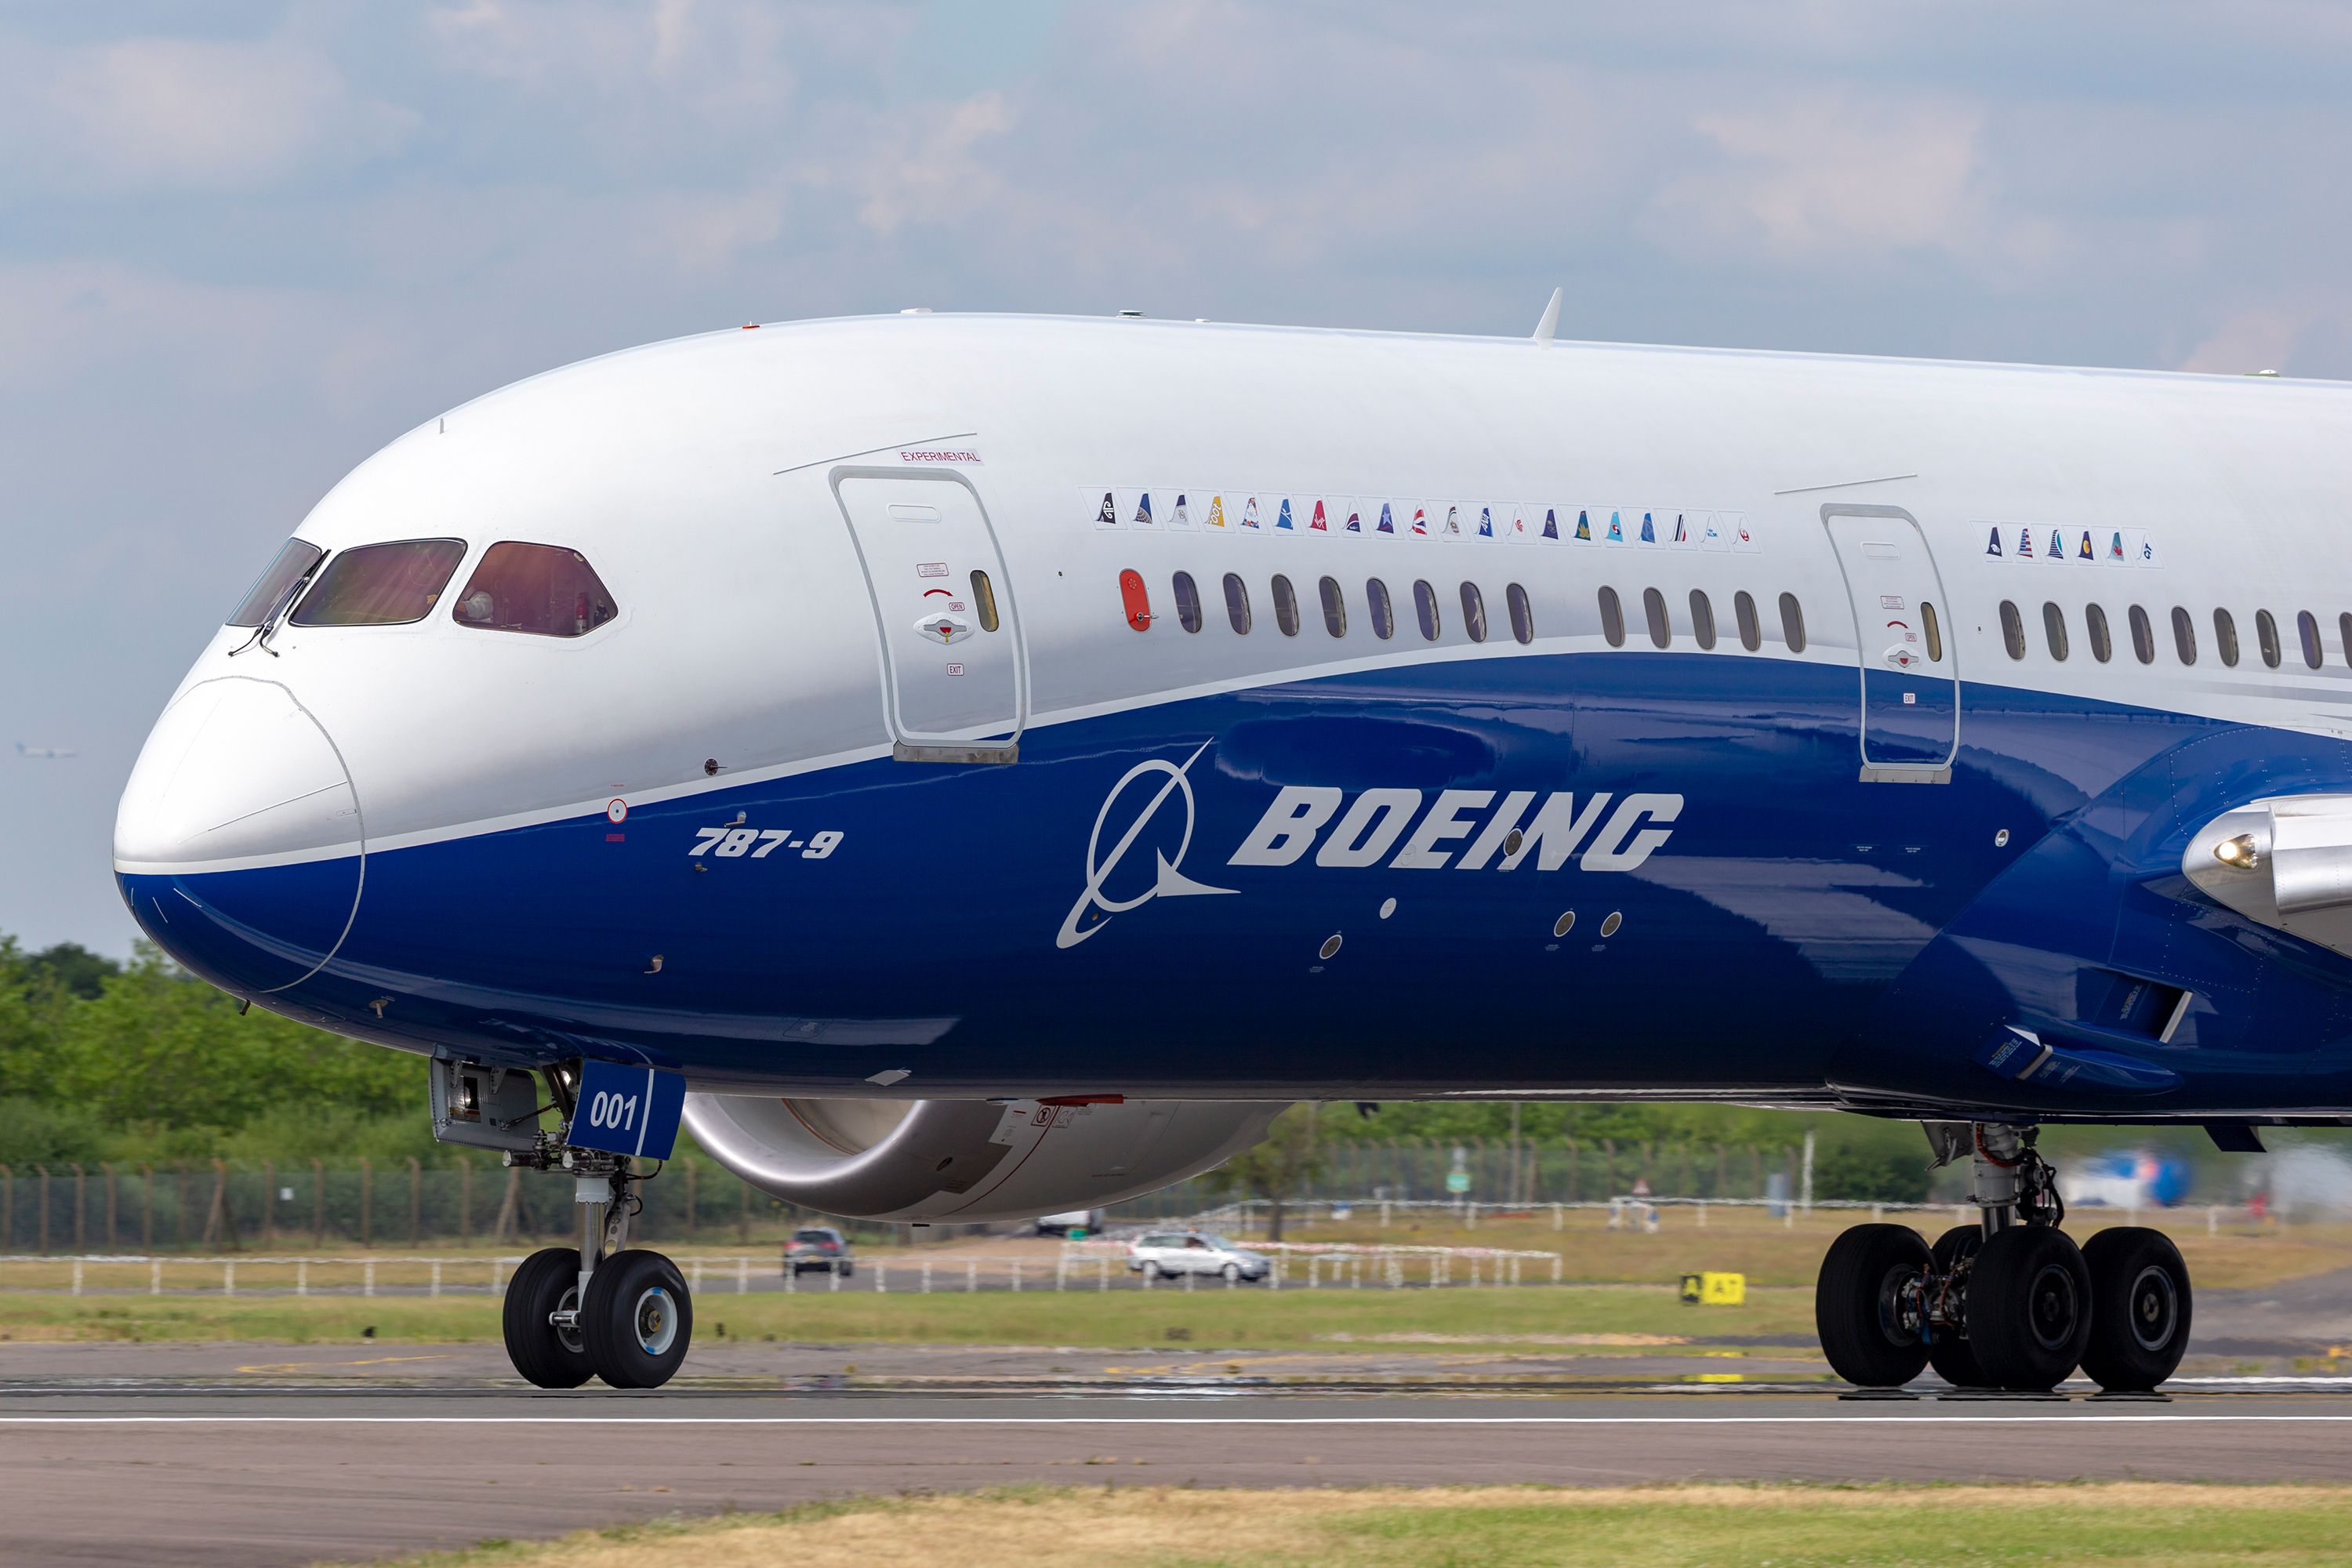 Boeing 787 in the manufacturer's livery at the Farnborough International Airshow 2014 shutterstock_1258445287